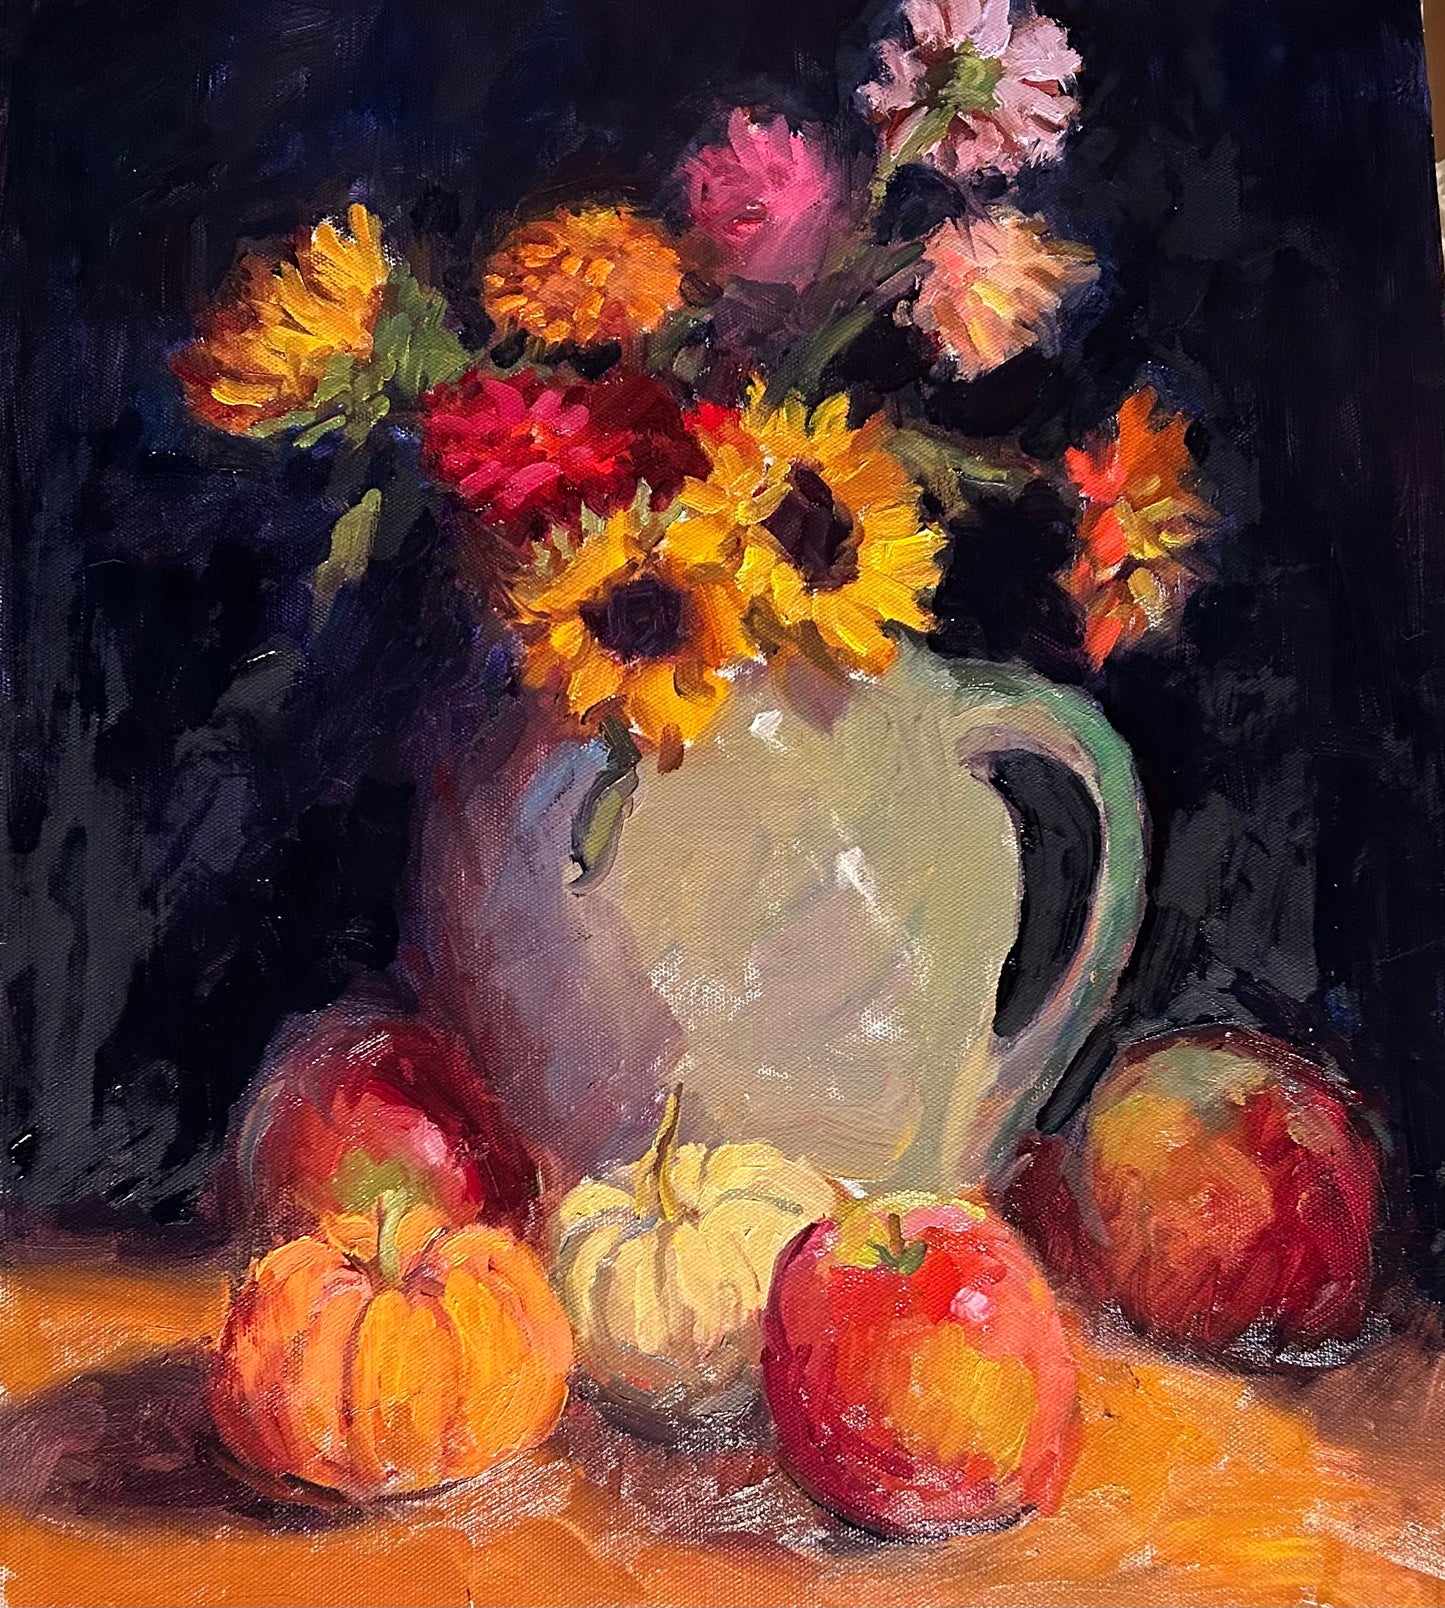 Flowers and Fruit (20 x 16 Inches)